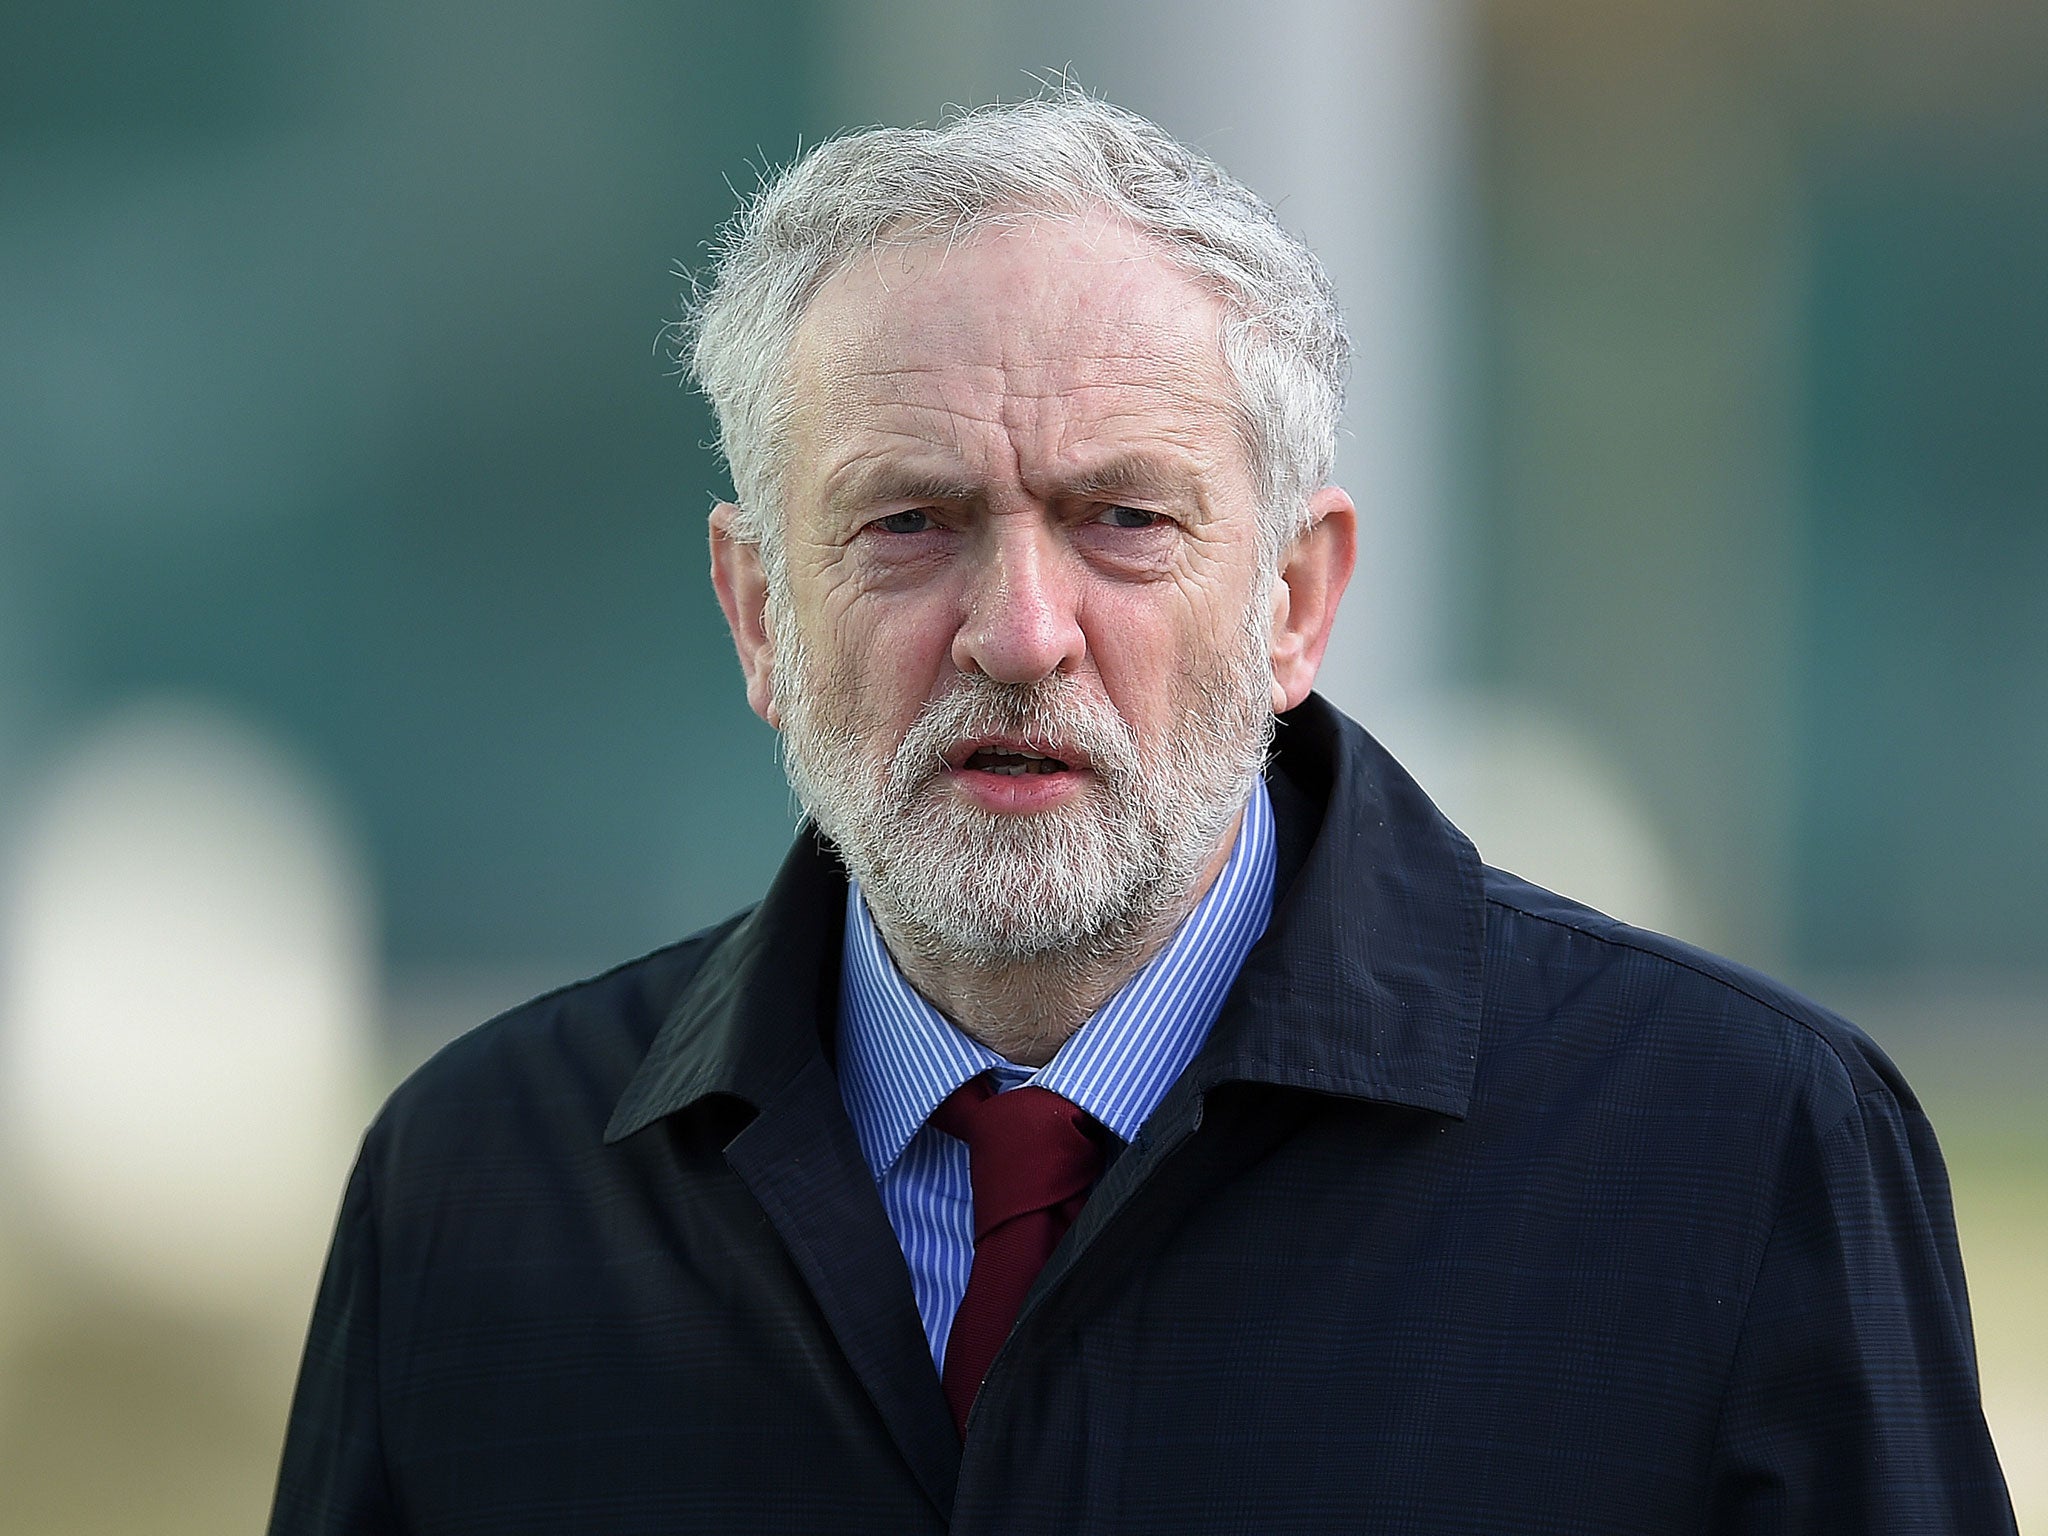 Labour leader Jeremy Corbyn was elected in September 2015